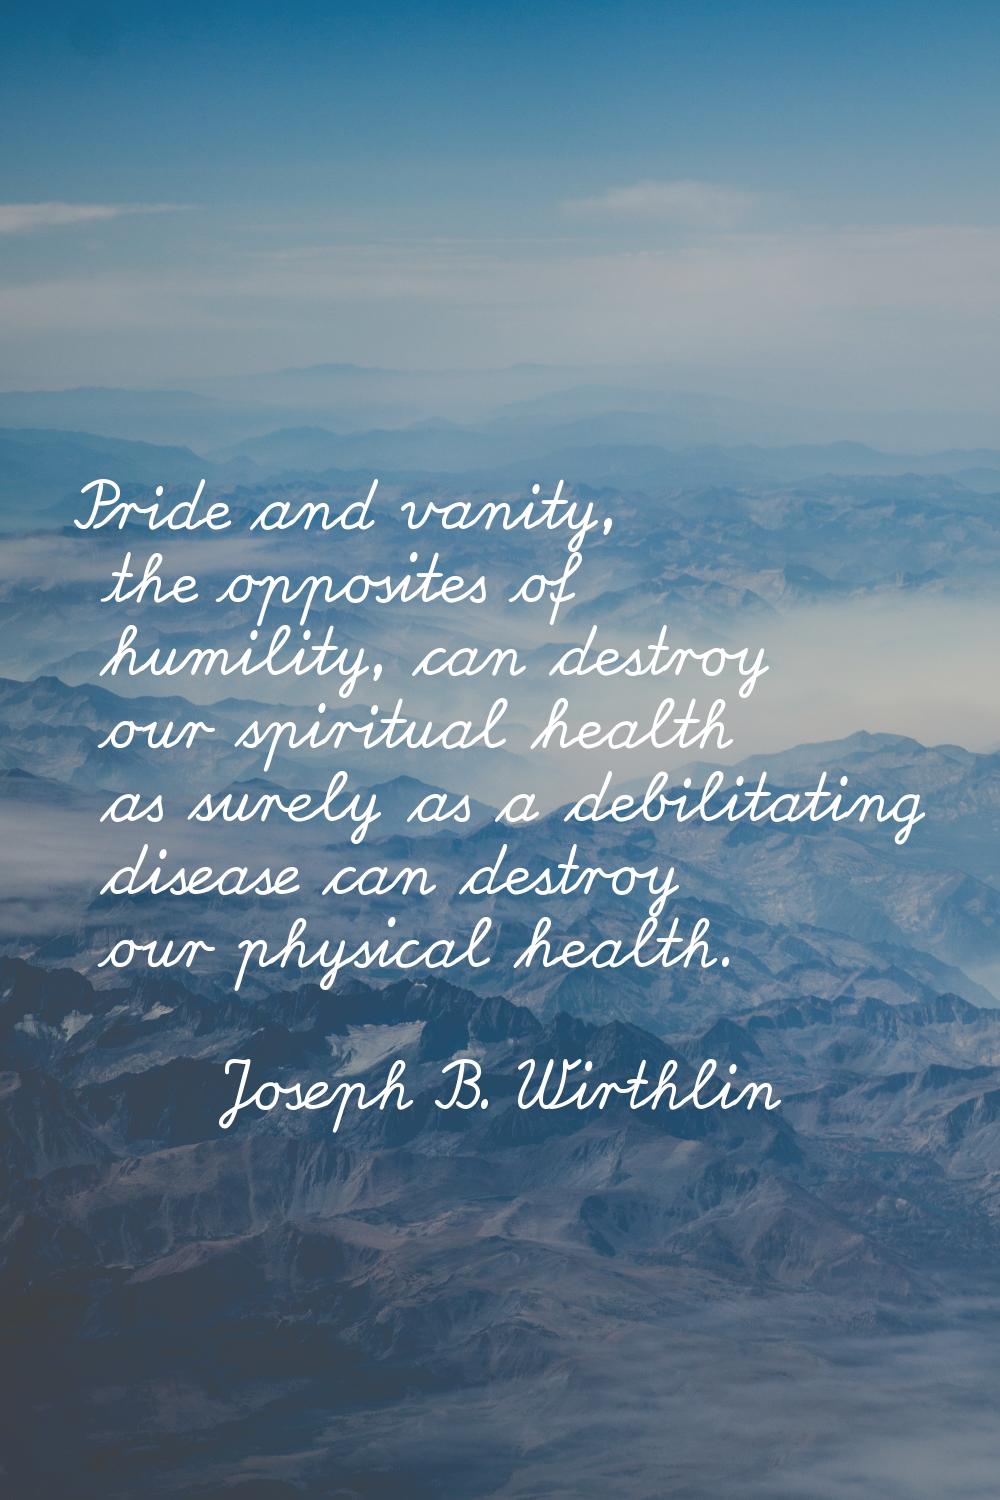 Pride and vanity, the opposites of humility, can destroy our spiritual health as surely as a debili